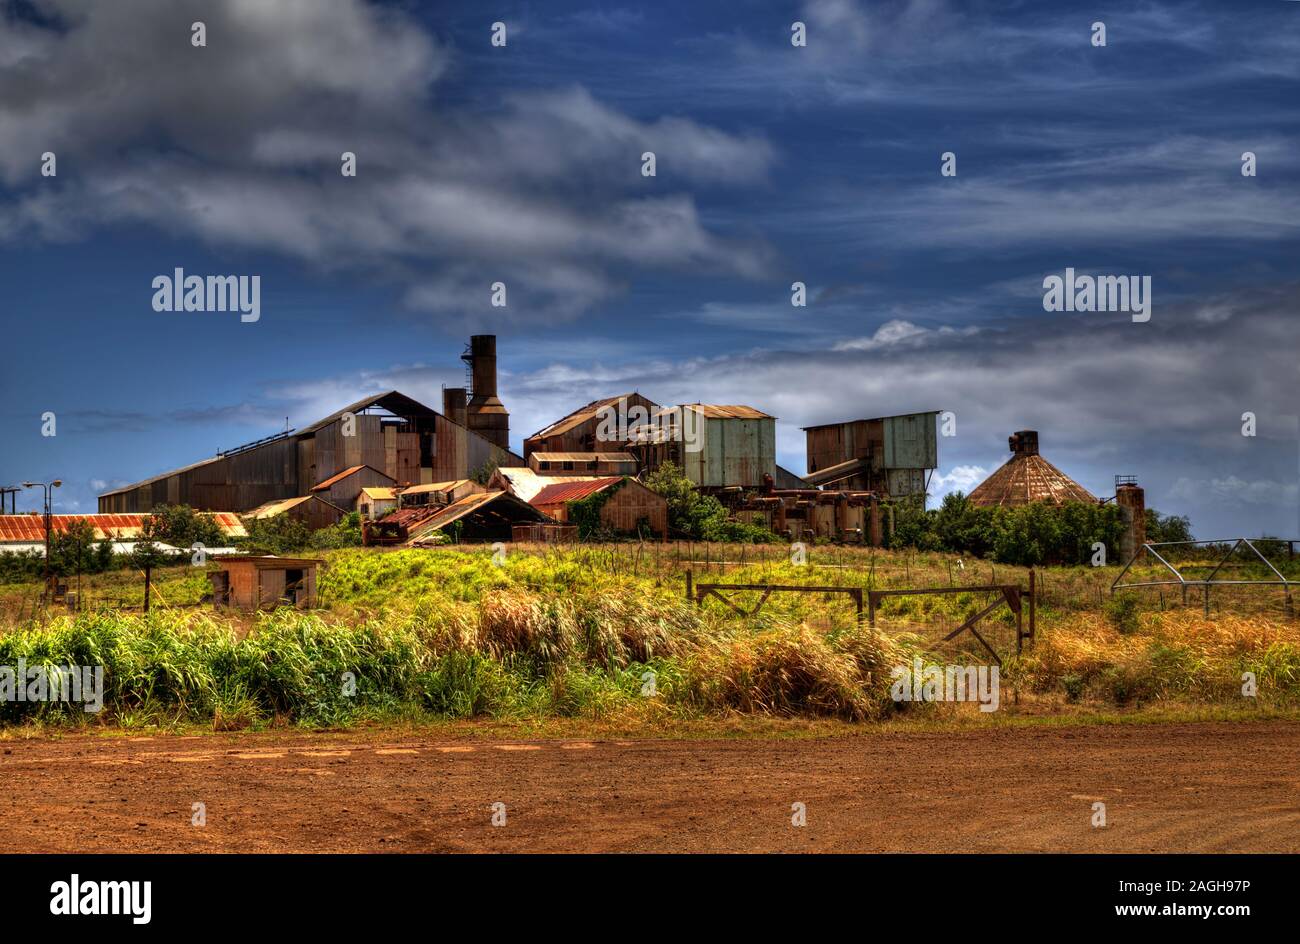 HDR image of an abandoned, old sugar mill (also known as Grove Farm Company) located on the island of Kauai, Hawaii. Stock Photo